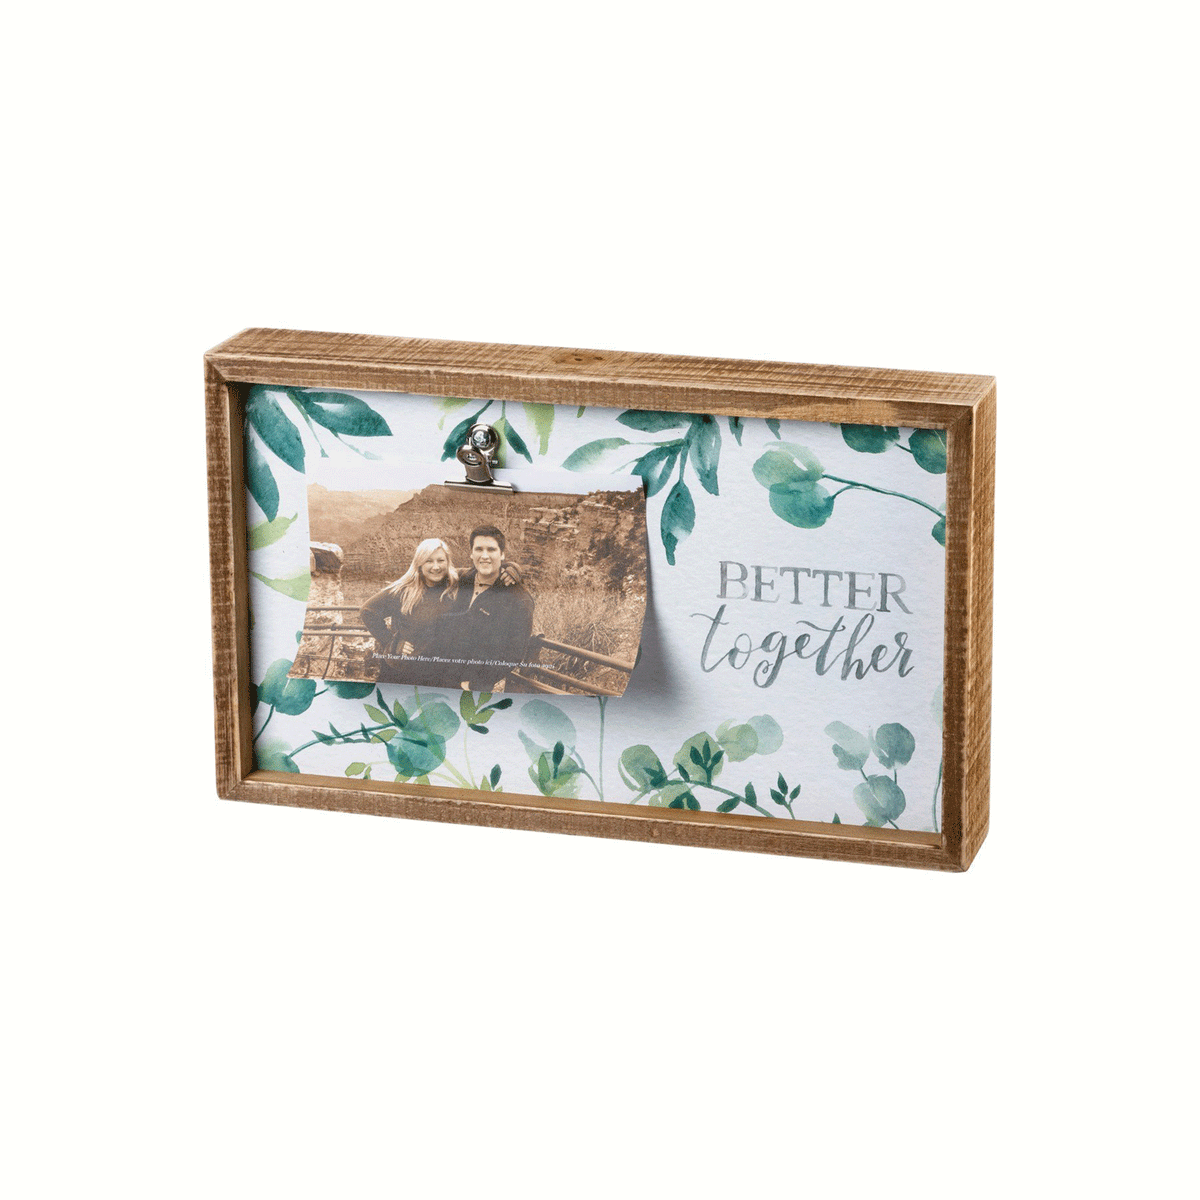 Better Together Inset Box Frame - Picture Frames & Wall